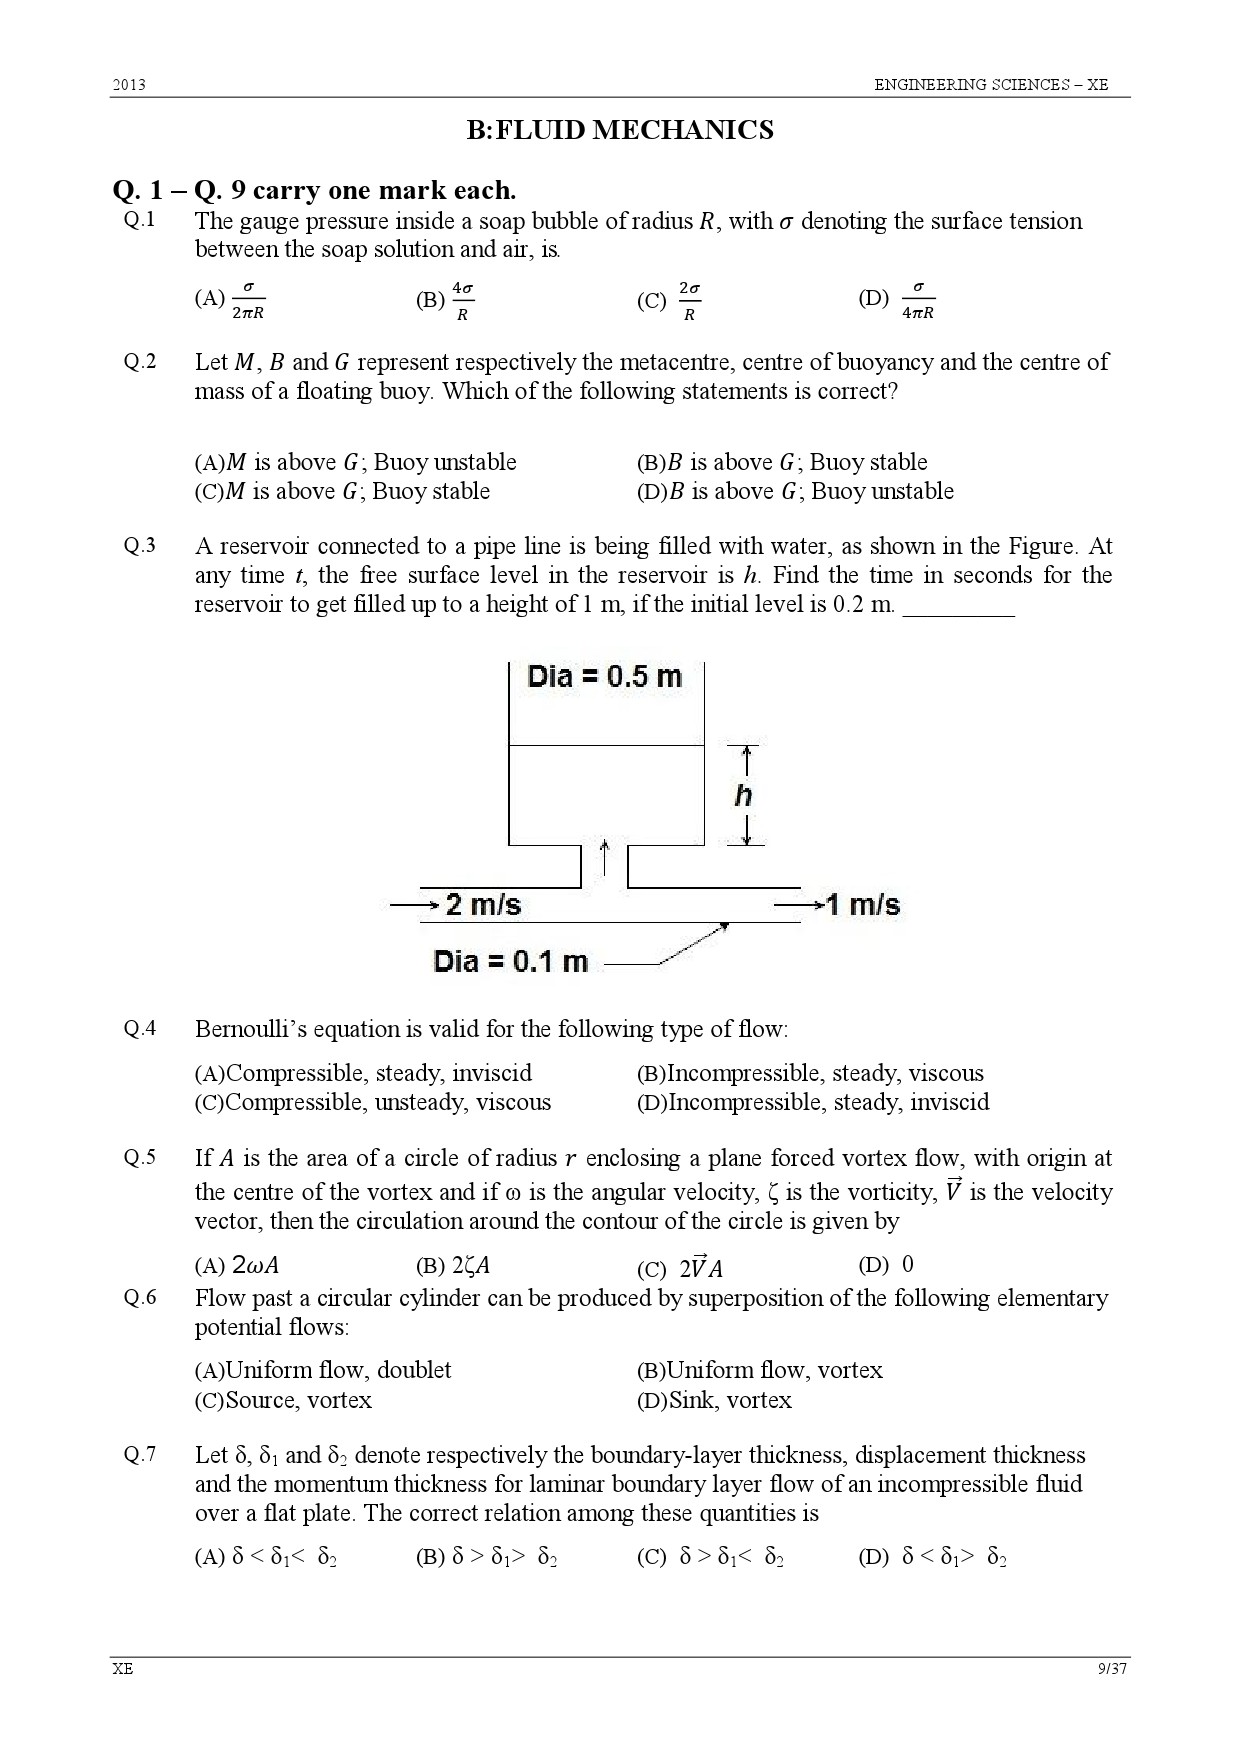 GATE Exam Question Paper 2013 Engineering Sciences 9